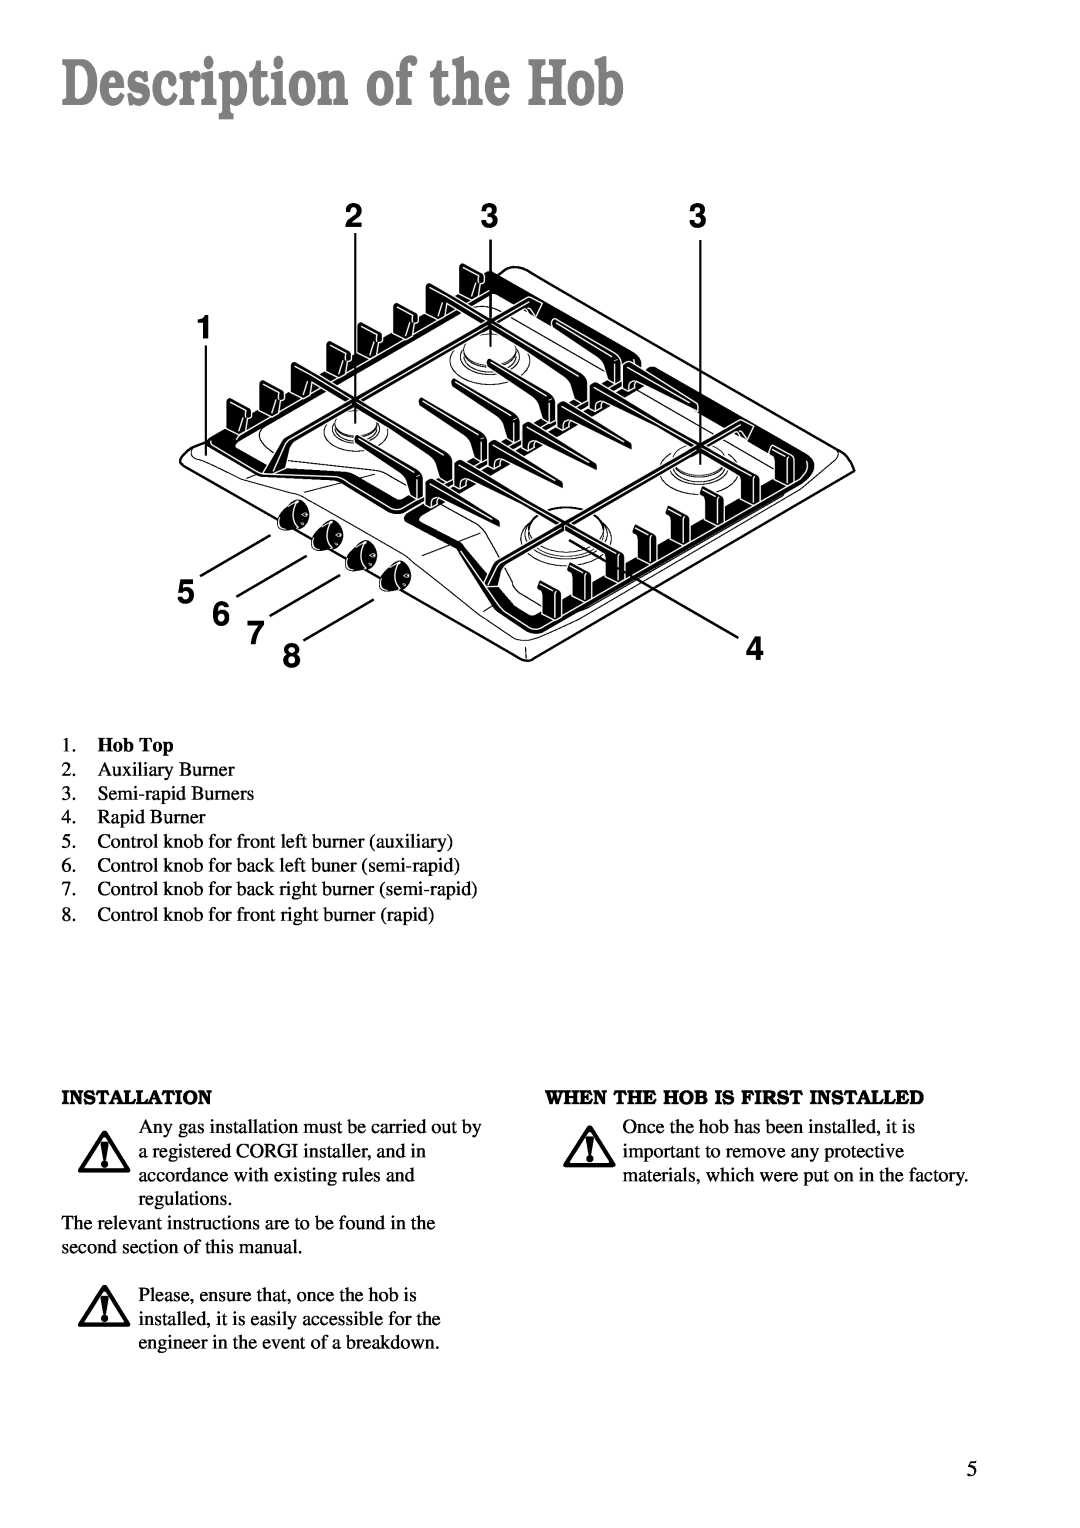 Zanussi ZGF 642 manual Description of the Hob, Hob Top, Installation, When The Hob Is First Installed 